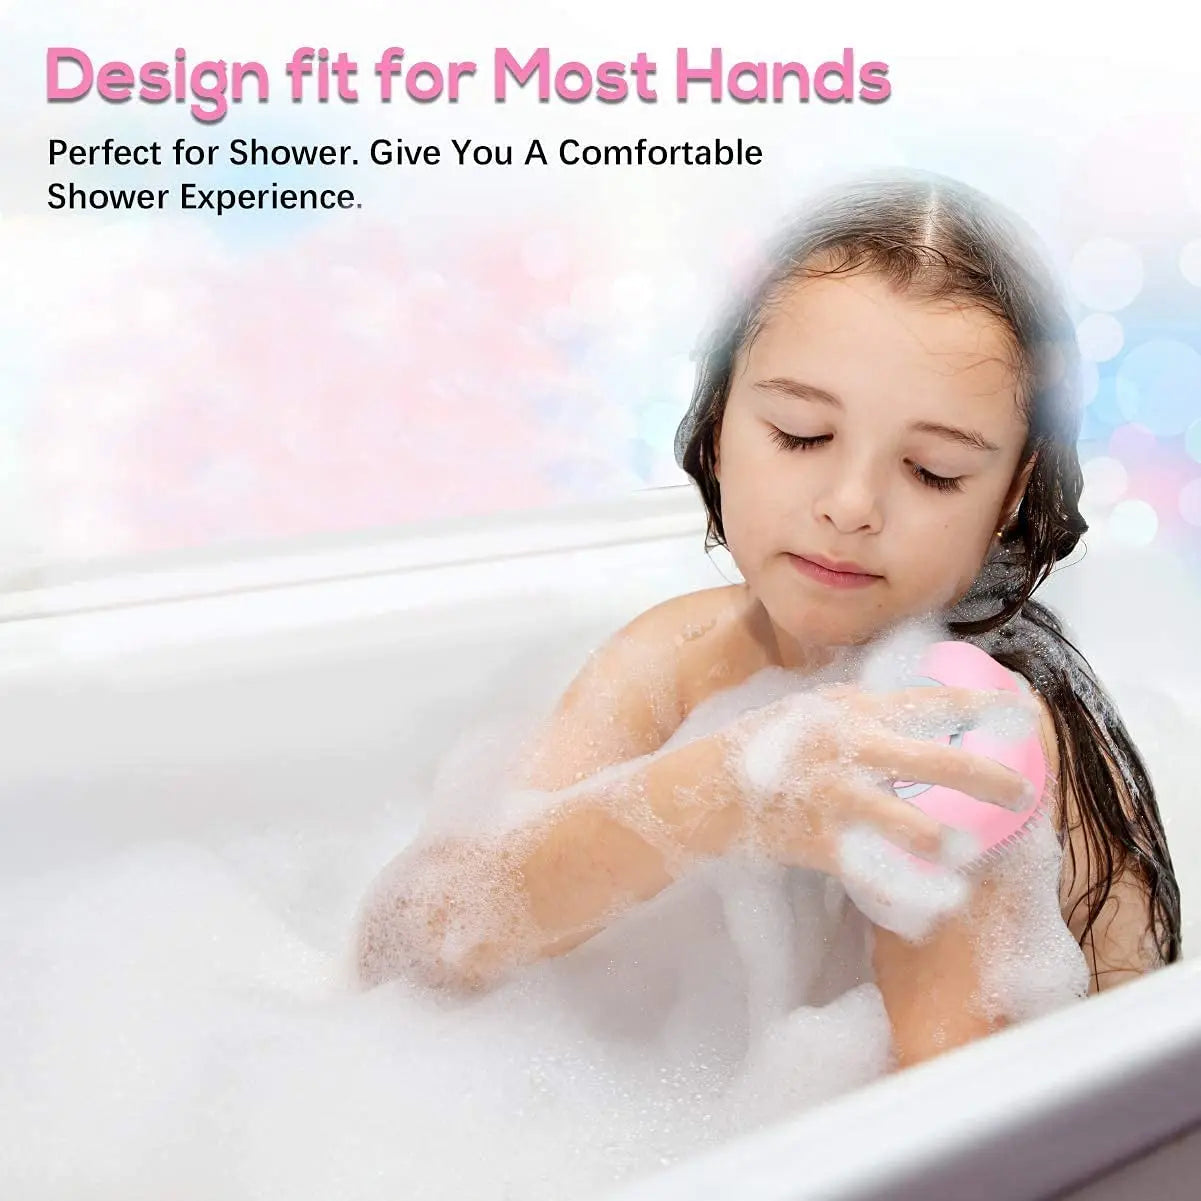 Body Scrubber with Soap Dispenser for Shower Silicone Exfoliating Brushes - Fast Forward